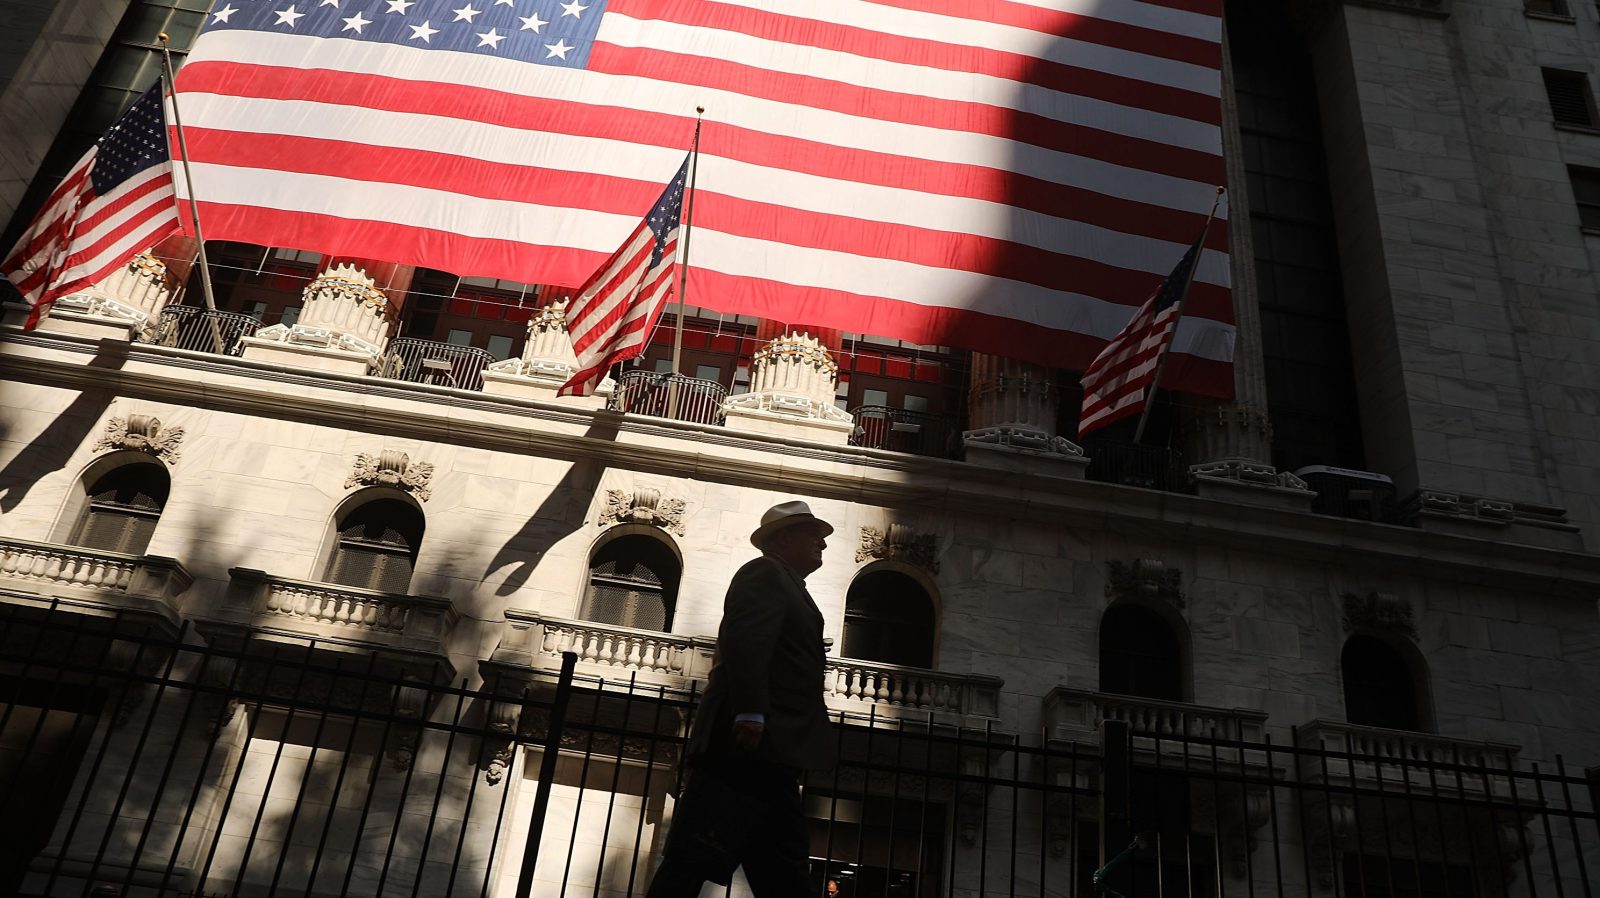 A man walks by the New York Stock Exchange (NYSE) on July 12, 2018 in New York City. As fears of a trade war eased with China, the Dow Jones Industrial Average rose 140 points in morning trading. (Photo by Spencer Platt/Getty Images)